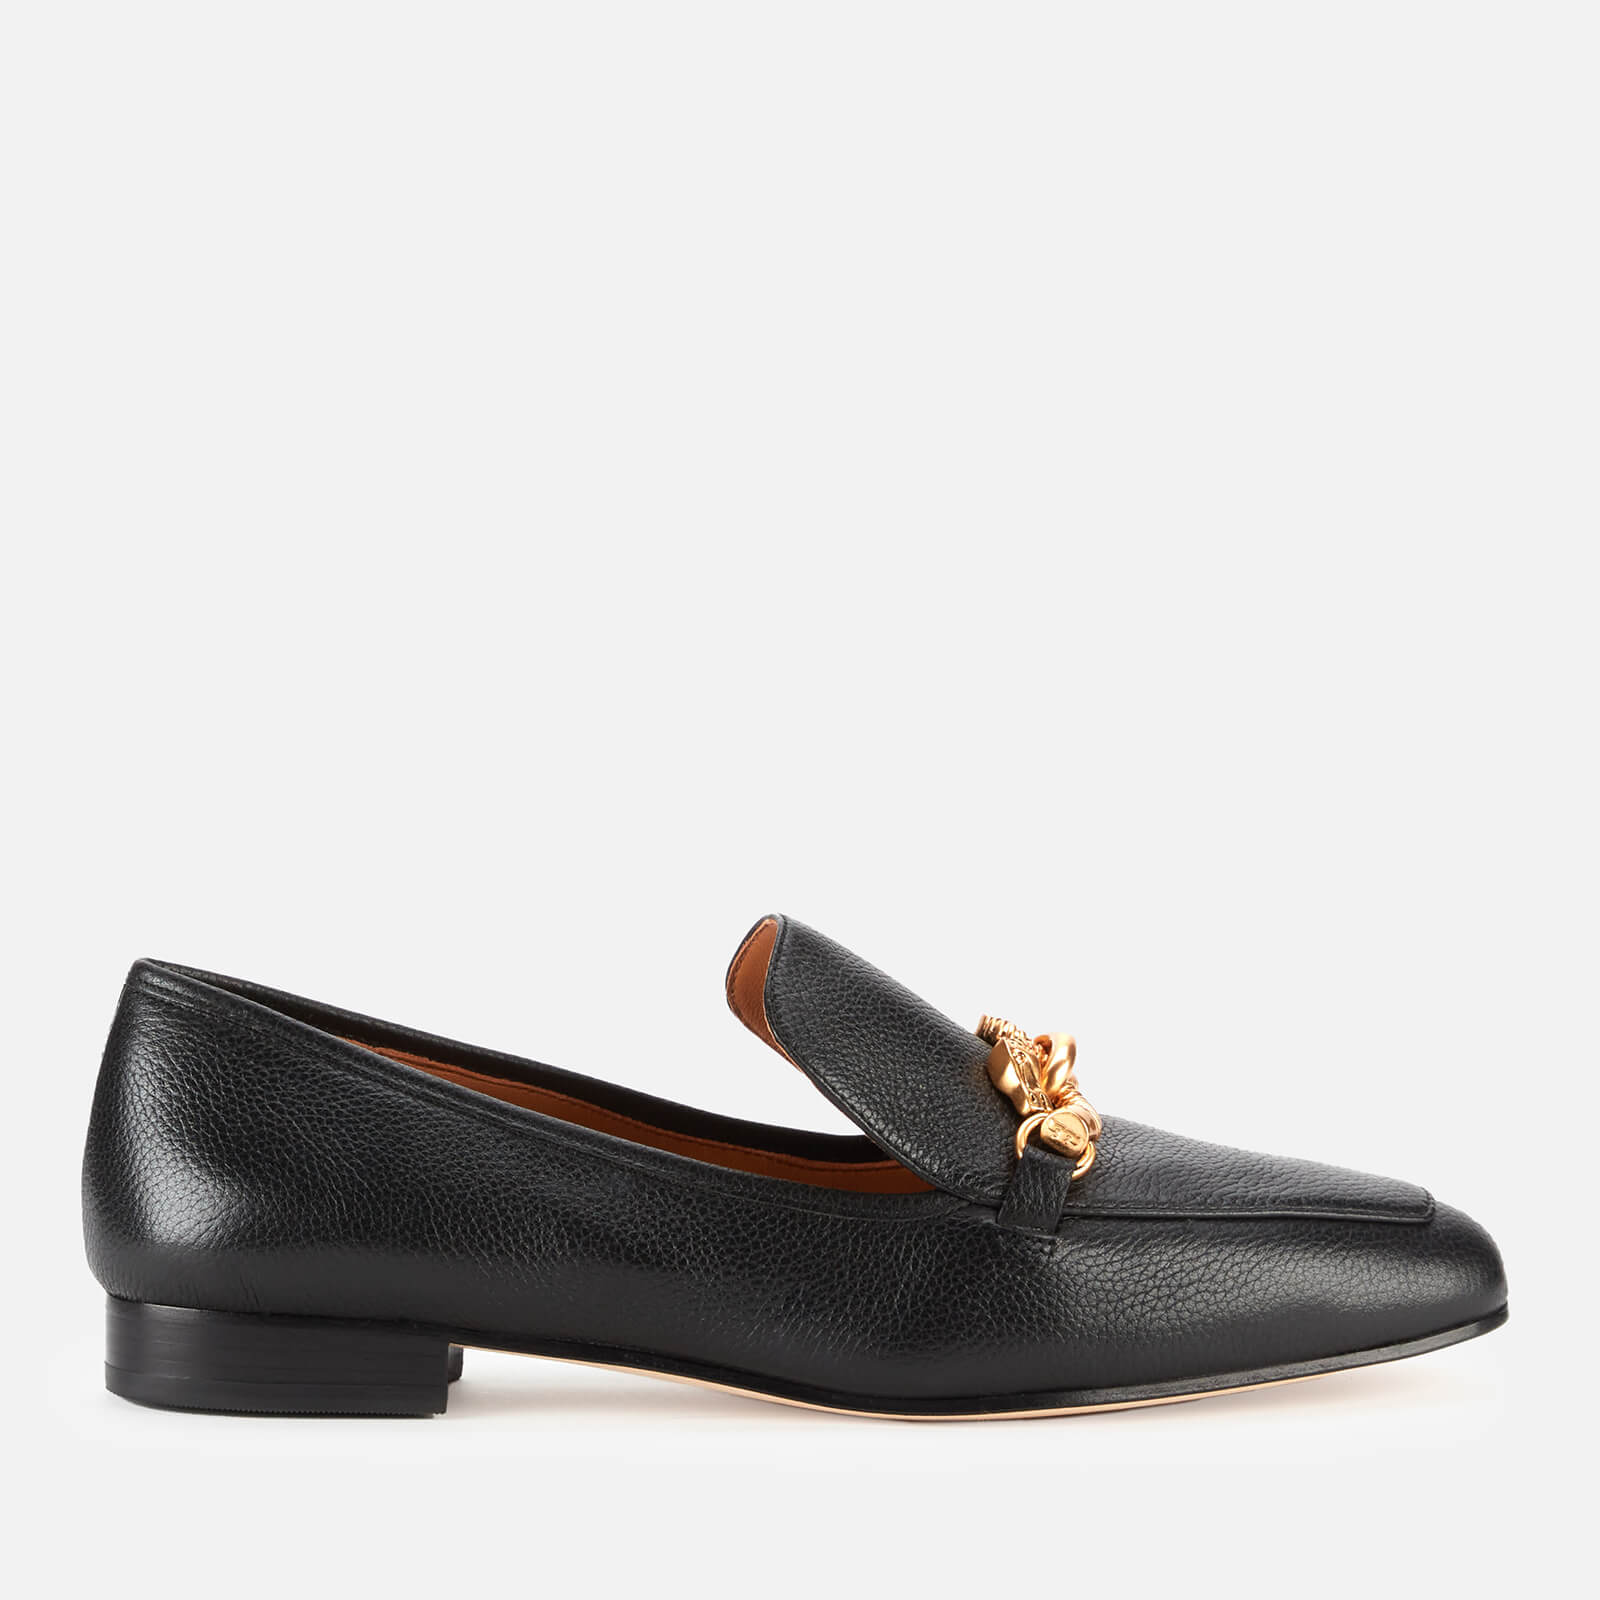 Tory Burch Women's Jessa Leather Loafers - Perfect Black - 3